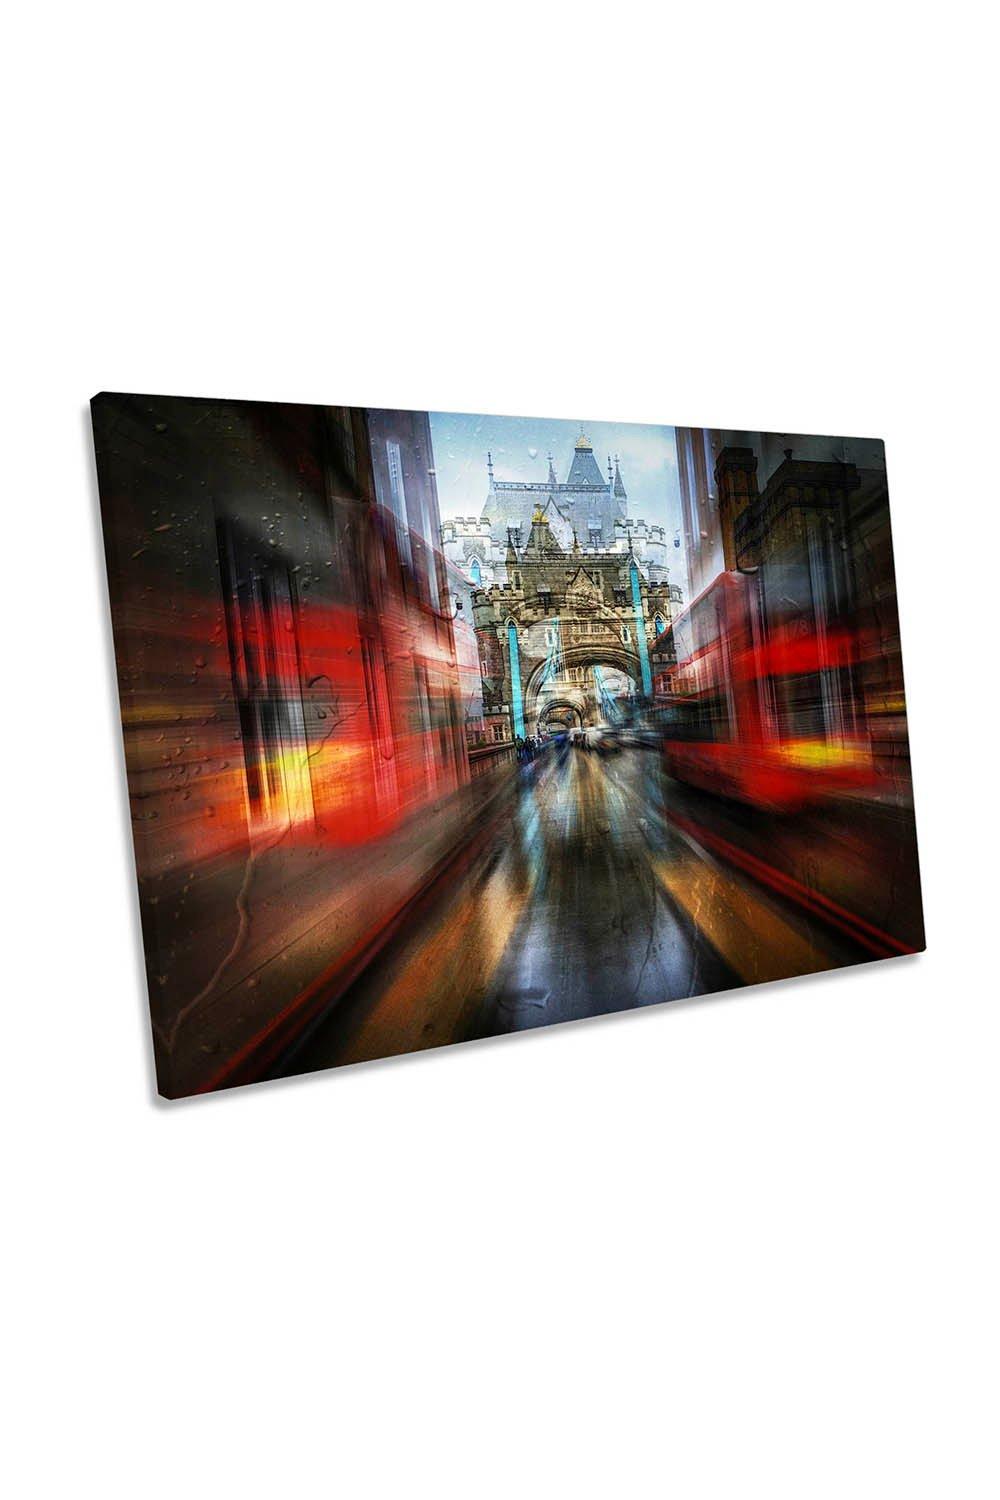 The Red Bus London City Abstract Modern Canvas Wall Art Picture Print